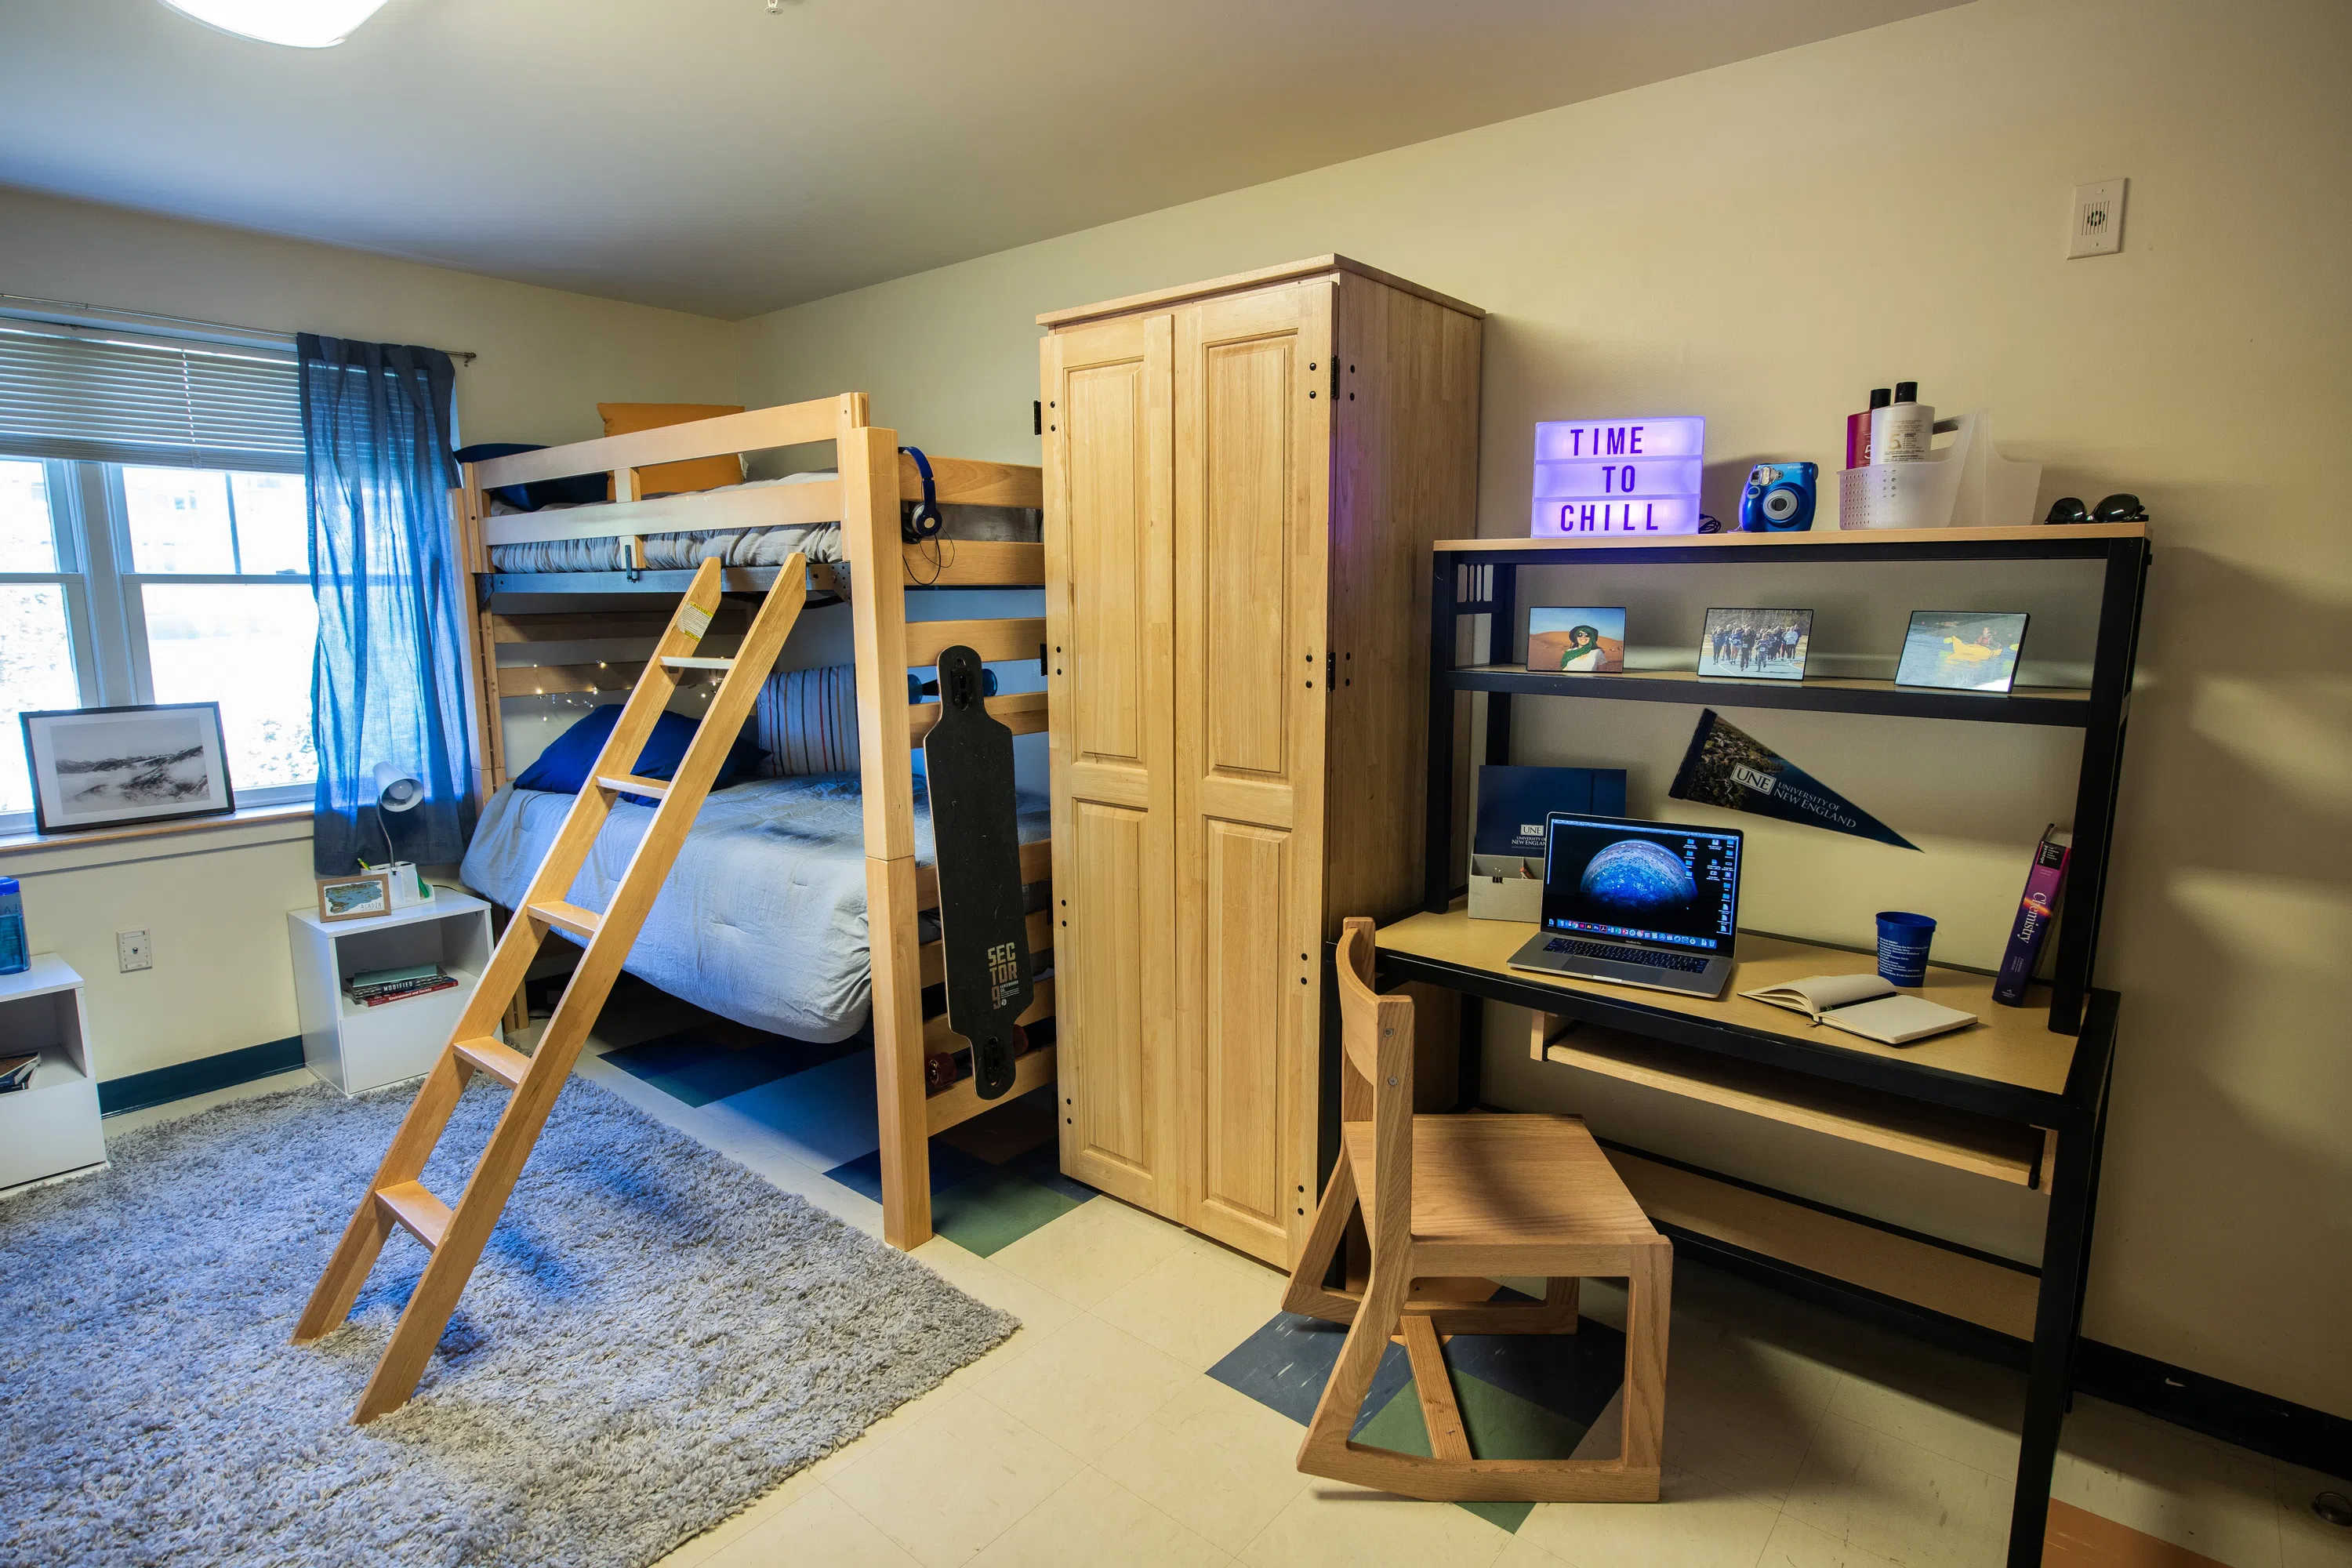 A wooden bunk bed with a ladder is on the left side of the room. Right side has a dresser and desk. 